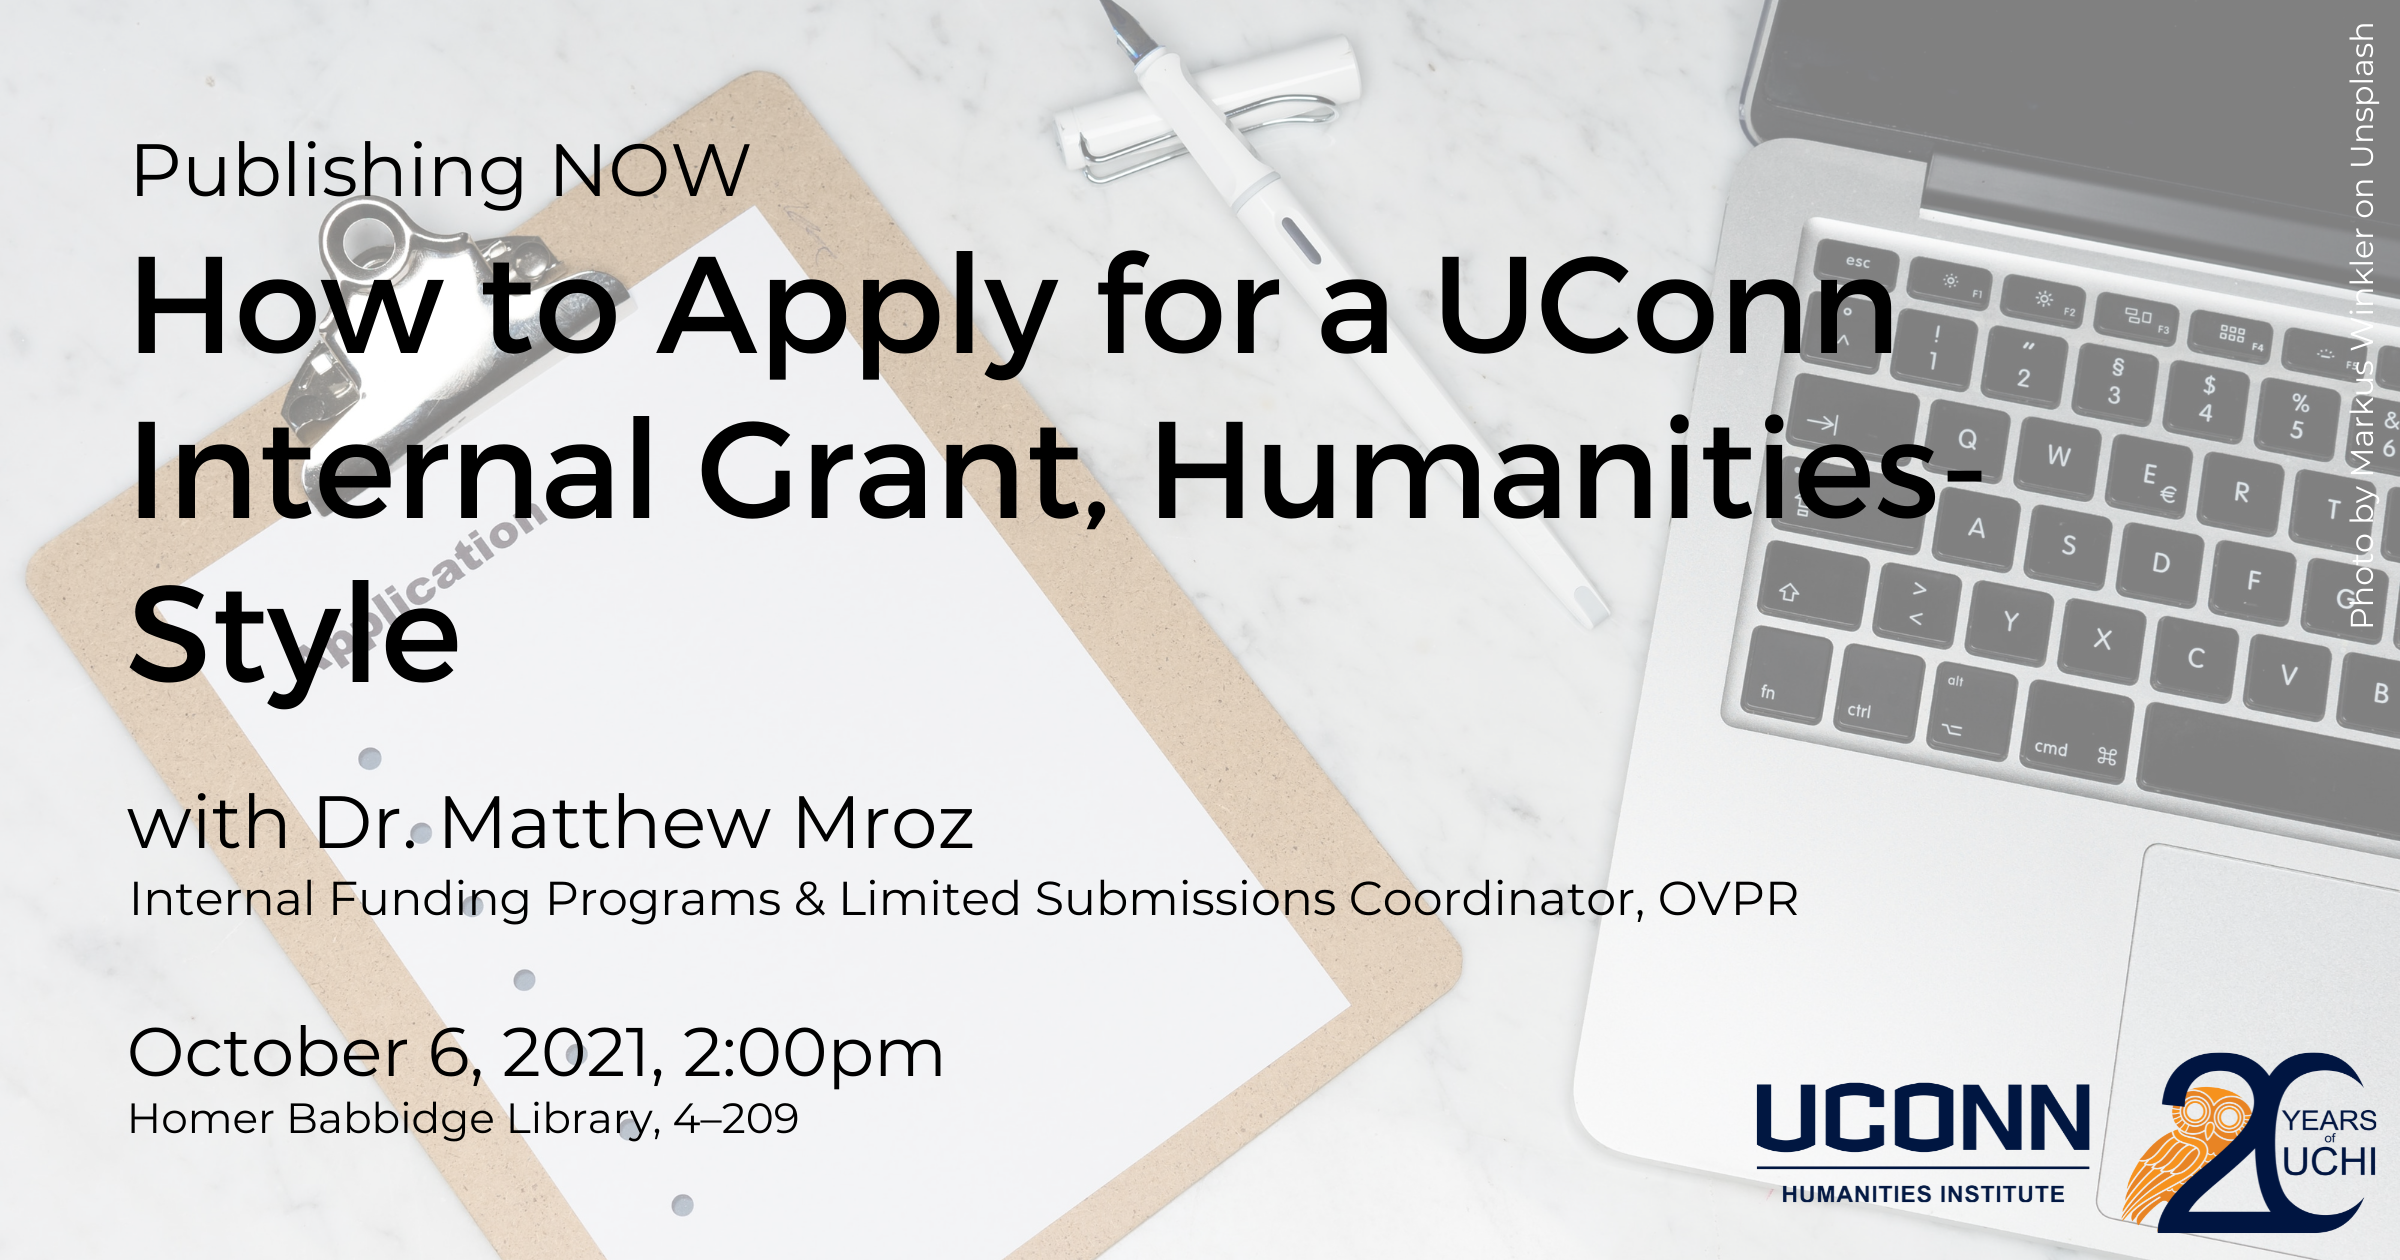 Publishing NOW: How to apply for a UConn Internal Grant, Humanities-Style. with Dr. Matthew Mroz, Internal Funding Coordinator, Office of the Vice President for Research. October 6, 2021, 2:00pm. Homer Babbidge Library 4-209